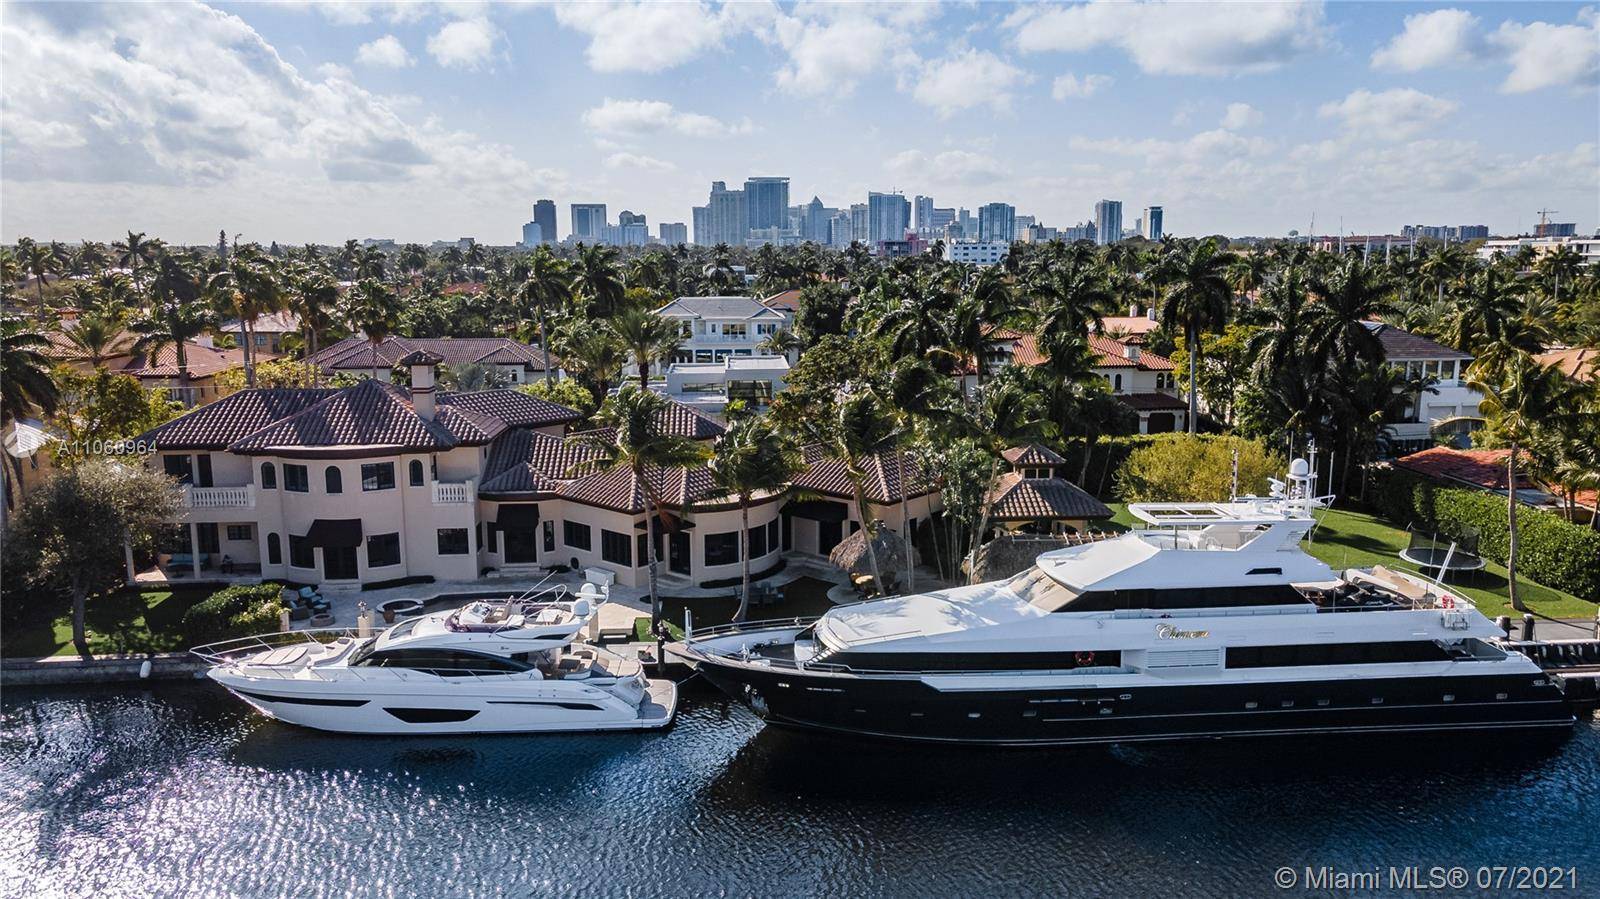 BEAUTIFUL 275' WATERFRONT HOME ON A 33, 000 SQ FT LOT, FEATURING EXPANSIVE WATERWAY VIEWS IN THE MIDDLE OF LAS OLAS ISLES.